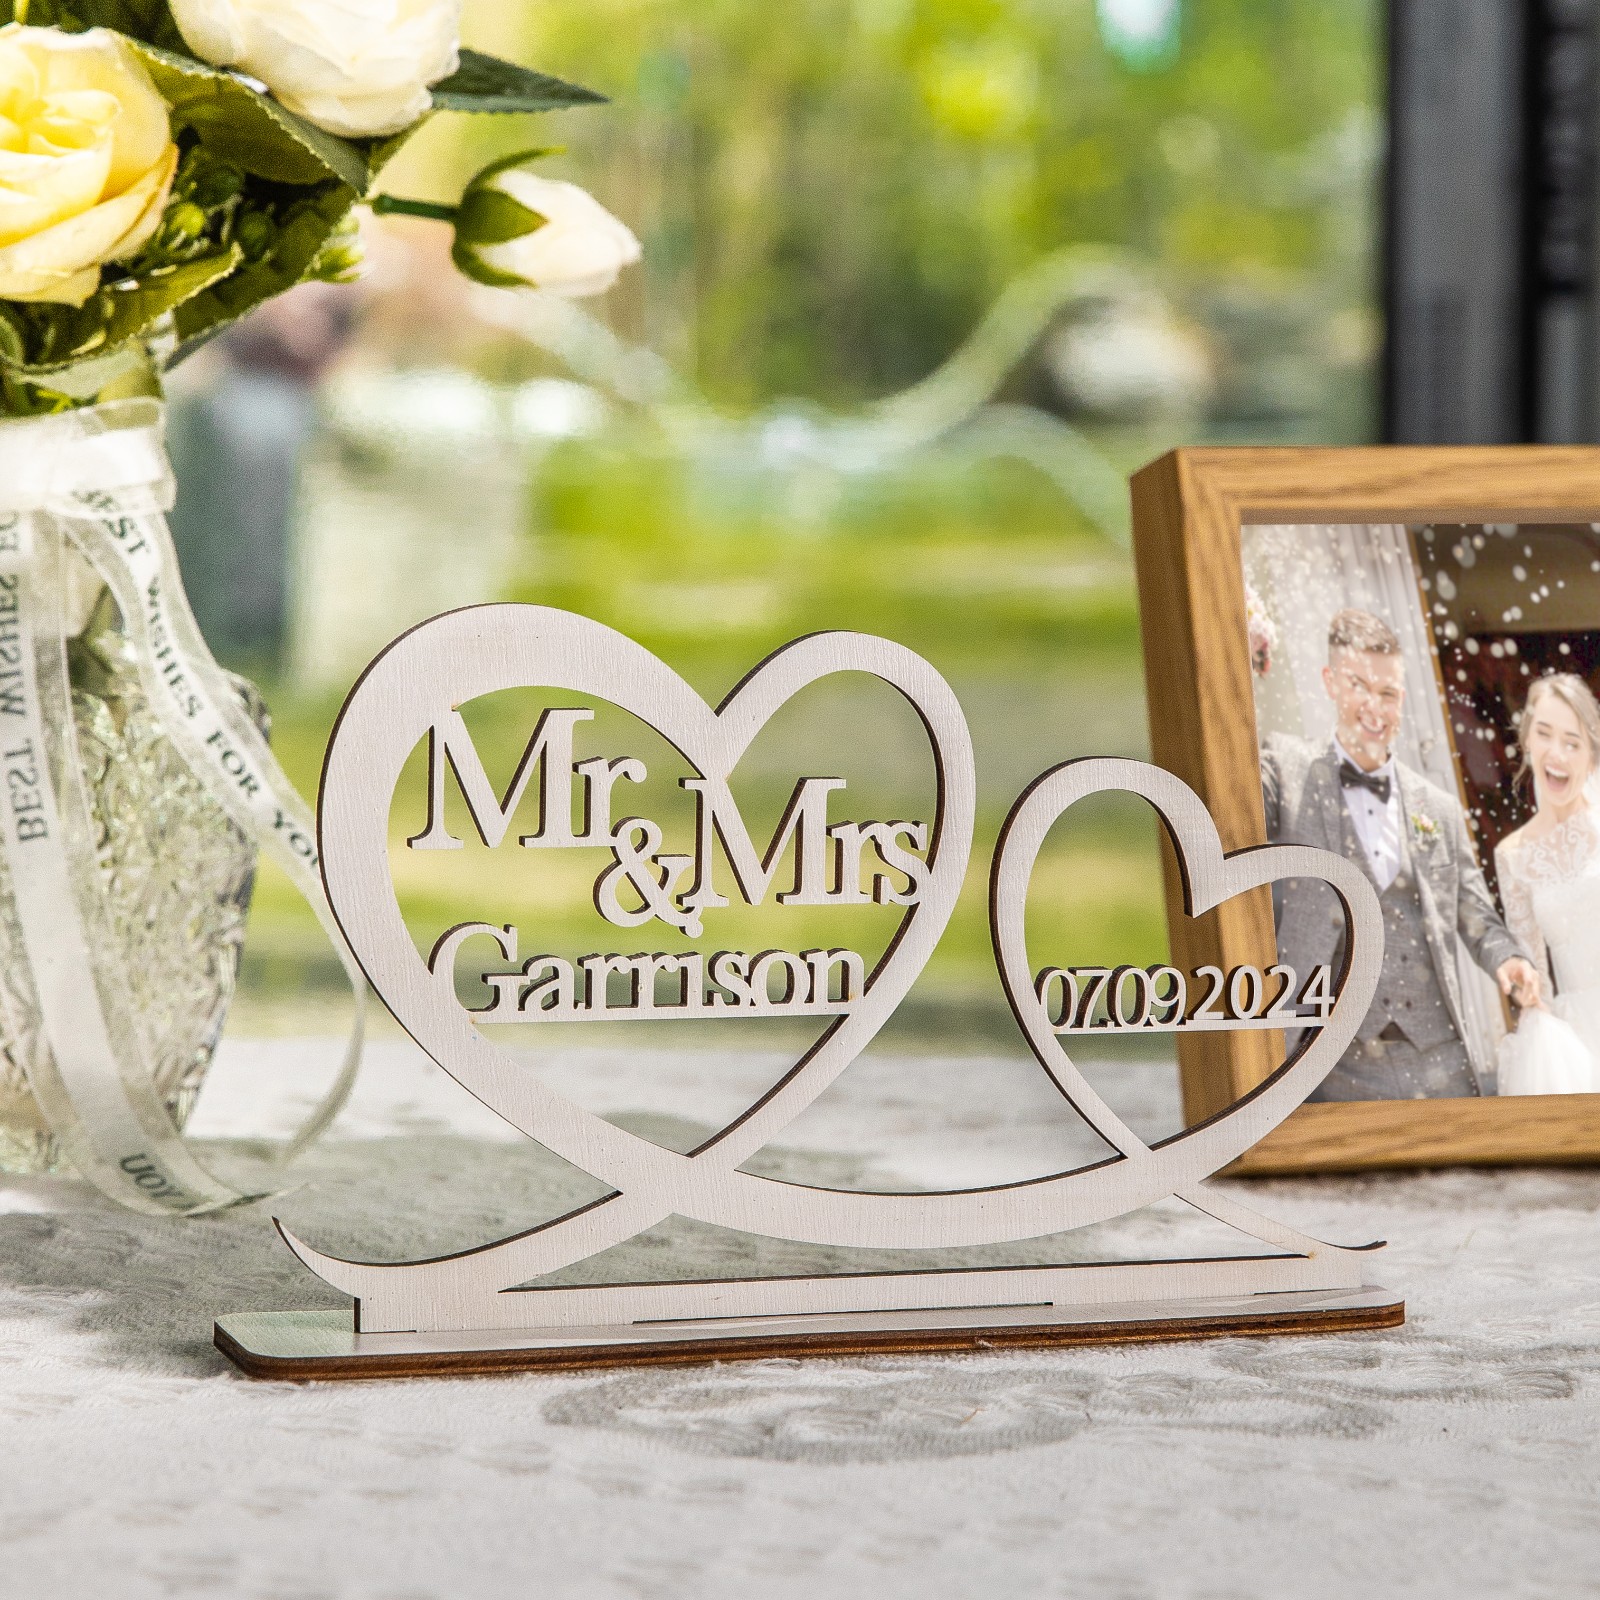 Personalized Wedding Keepsakes Table Decor Sign with Name and Date, Wedding Gift for New Couples, Valentine's Day